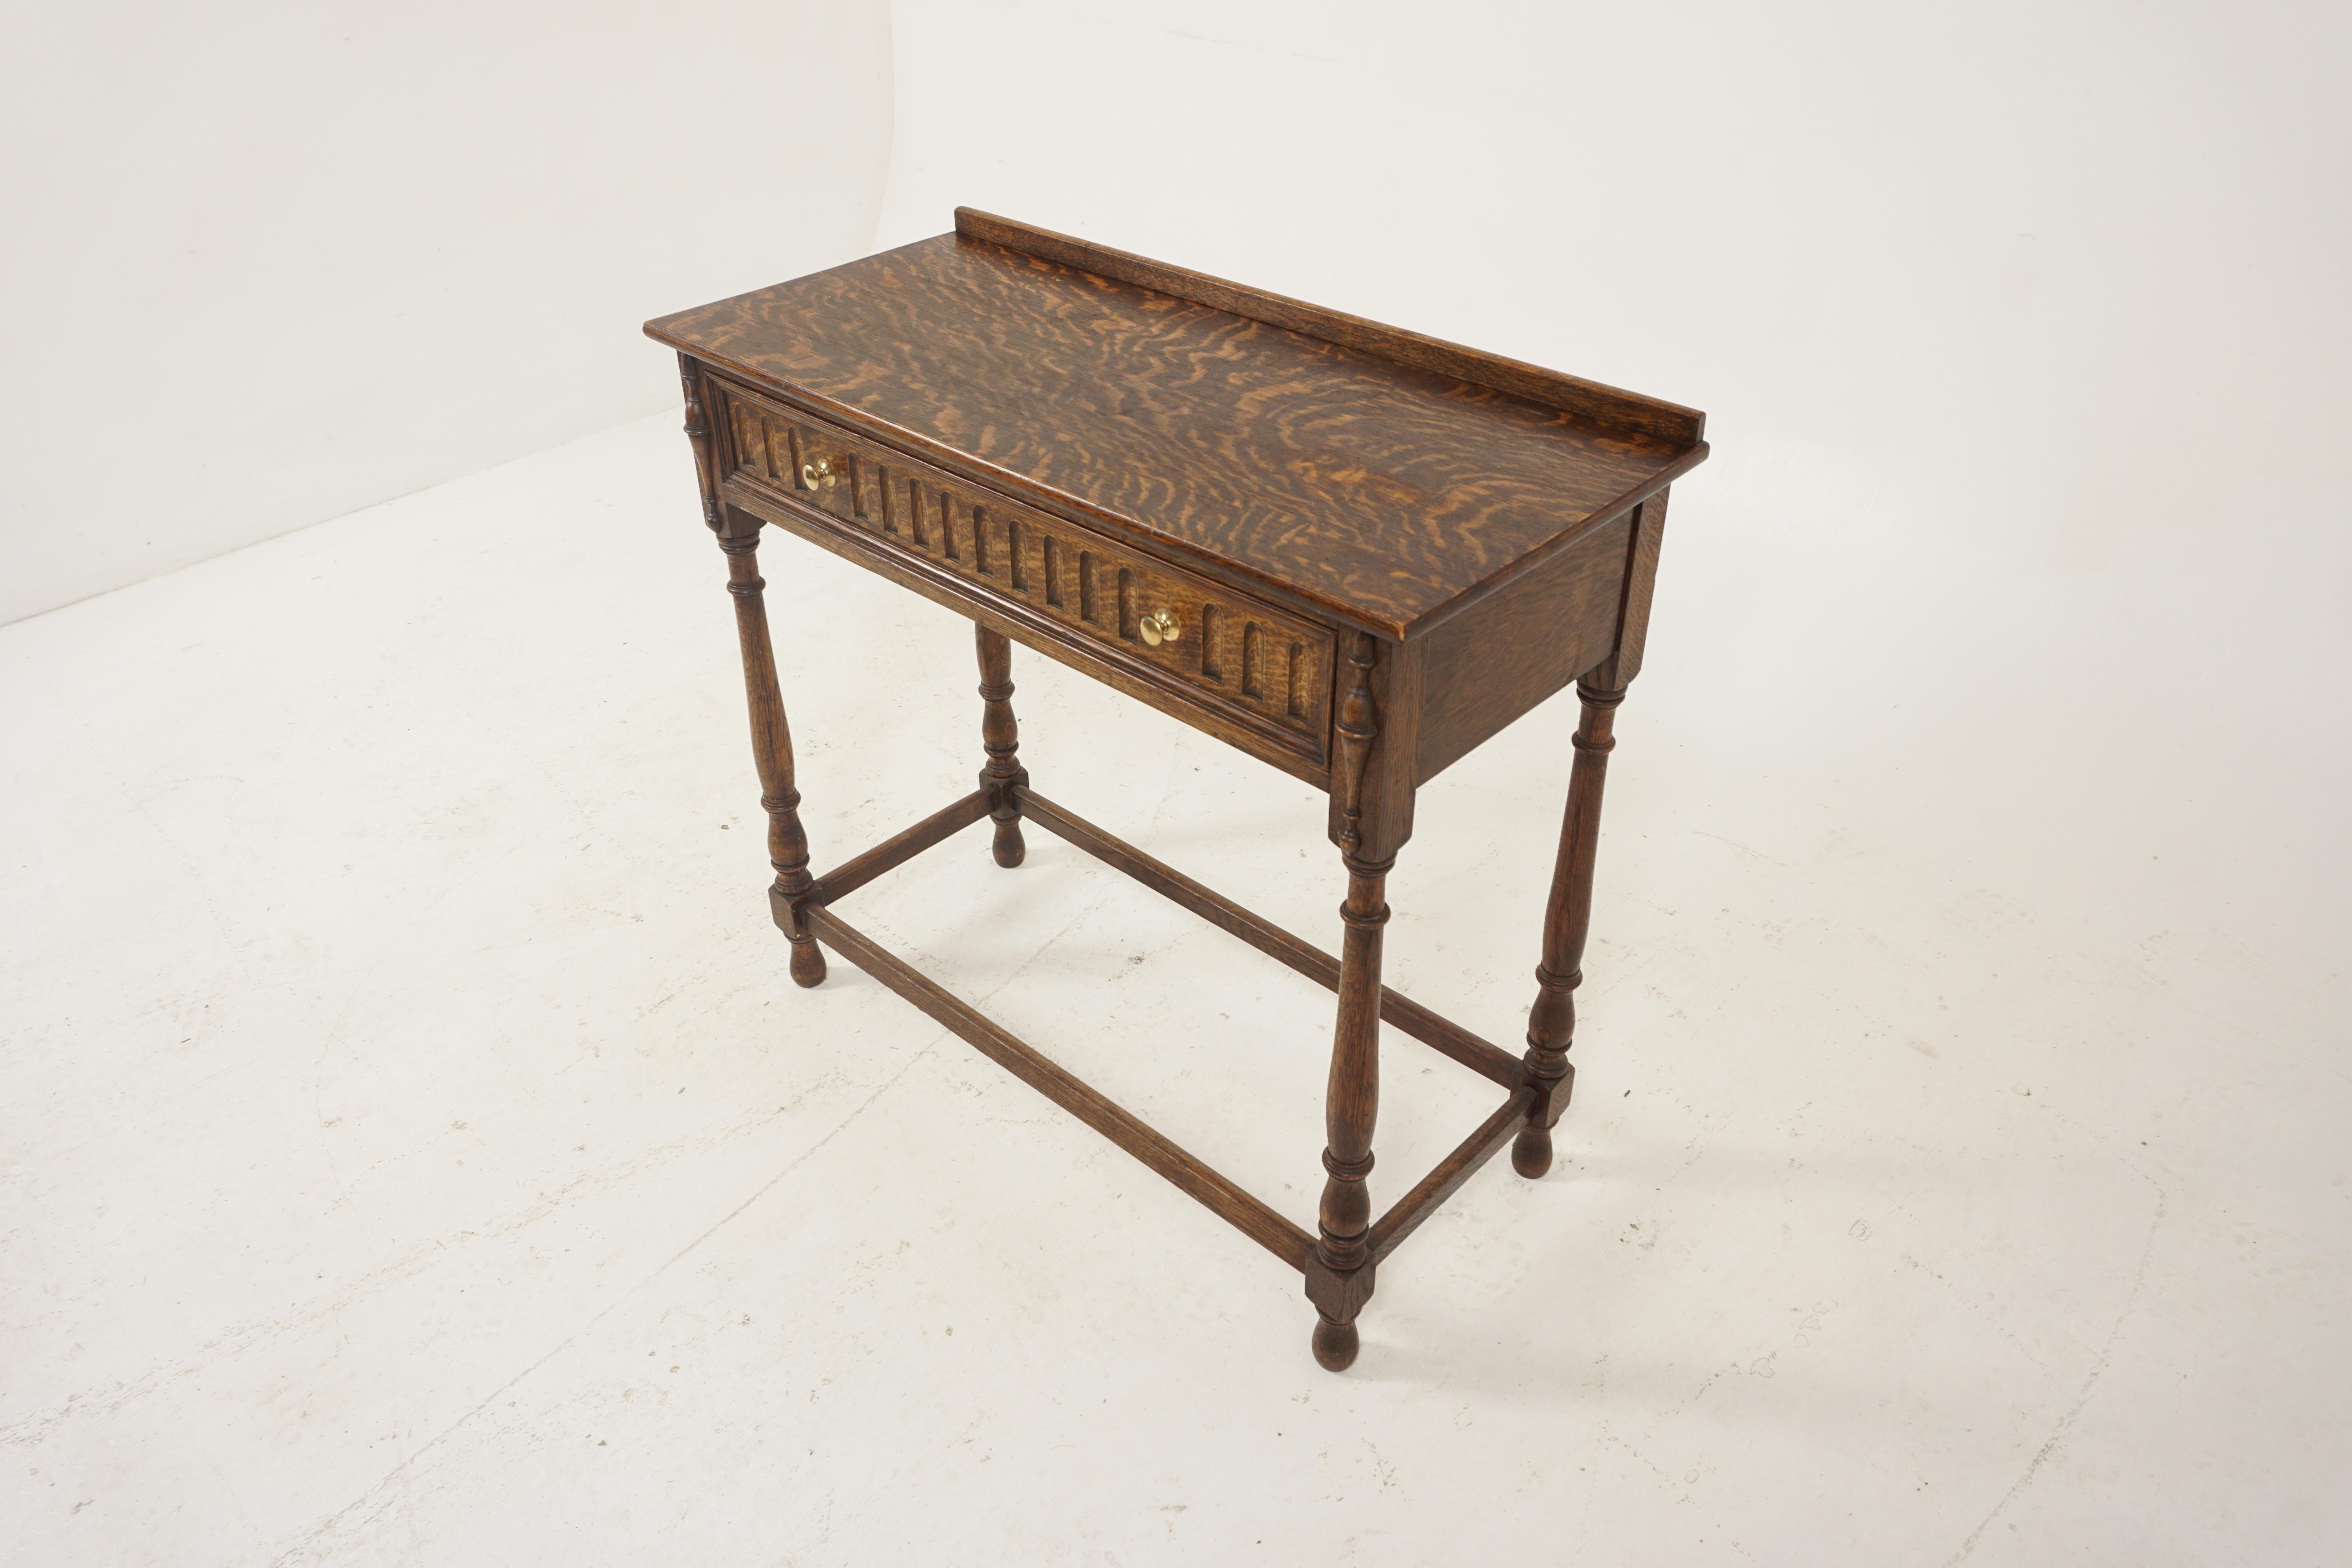 Antique hall table, tiger oak, serving table, Scotland 1920, H265

Scotland 1920
Solid oak
Original finish
Rectangular moulded top with gallery to the back - 1